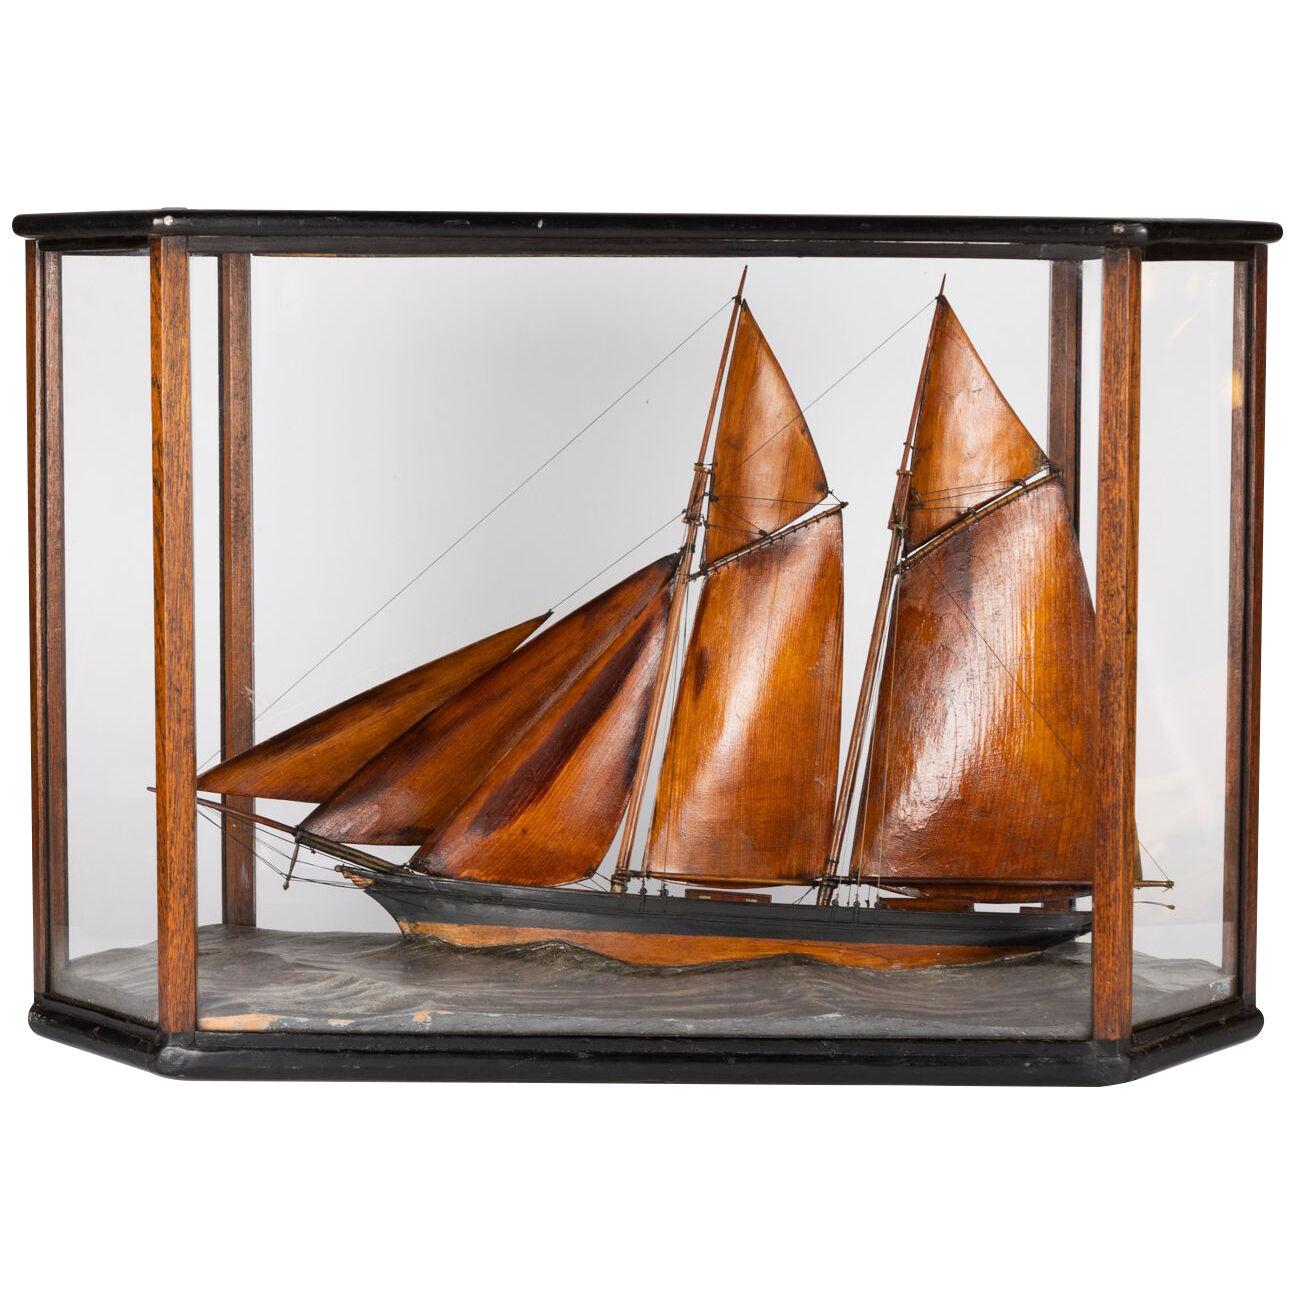 Diorama of a finely carved Ketch sailing at sea